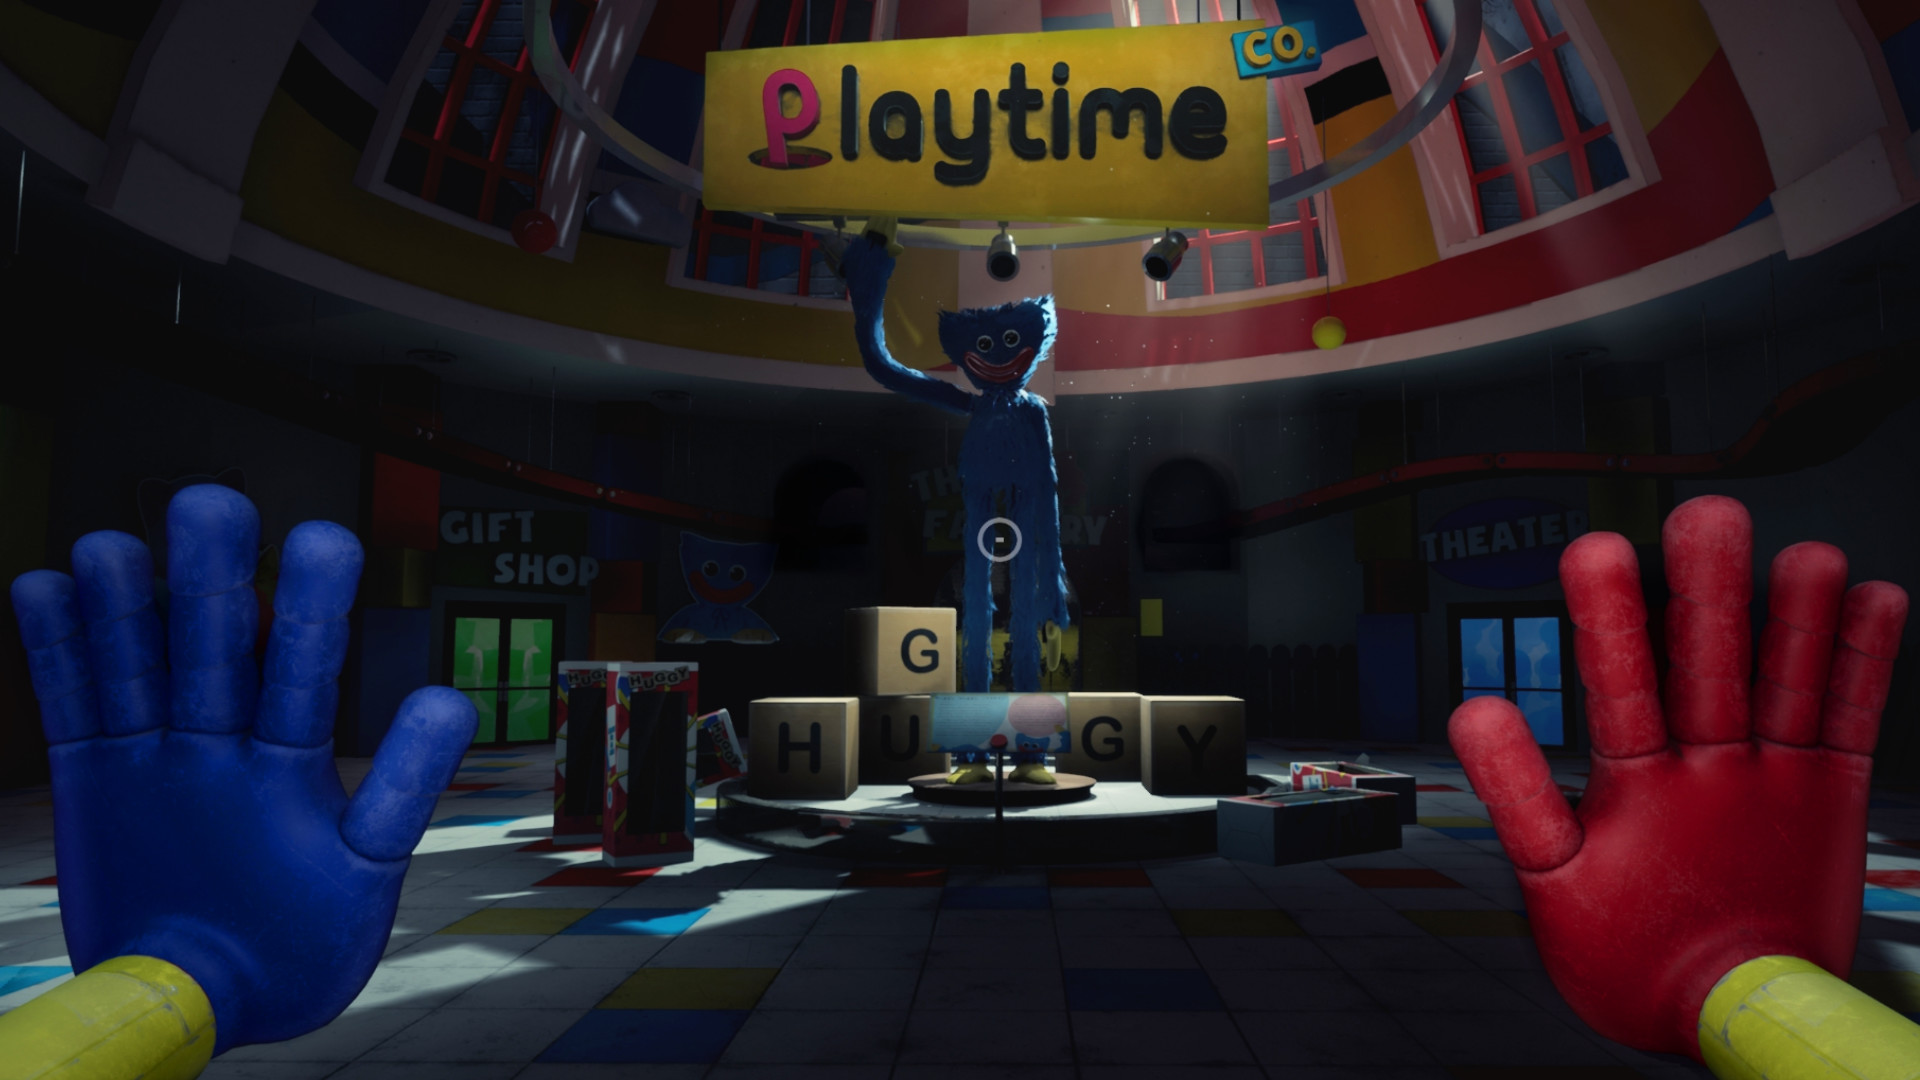 Poppy Playtime Is A Popular Horror Gaming Franchise | Image Source: IGDB